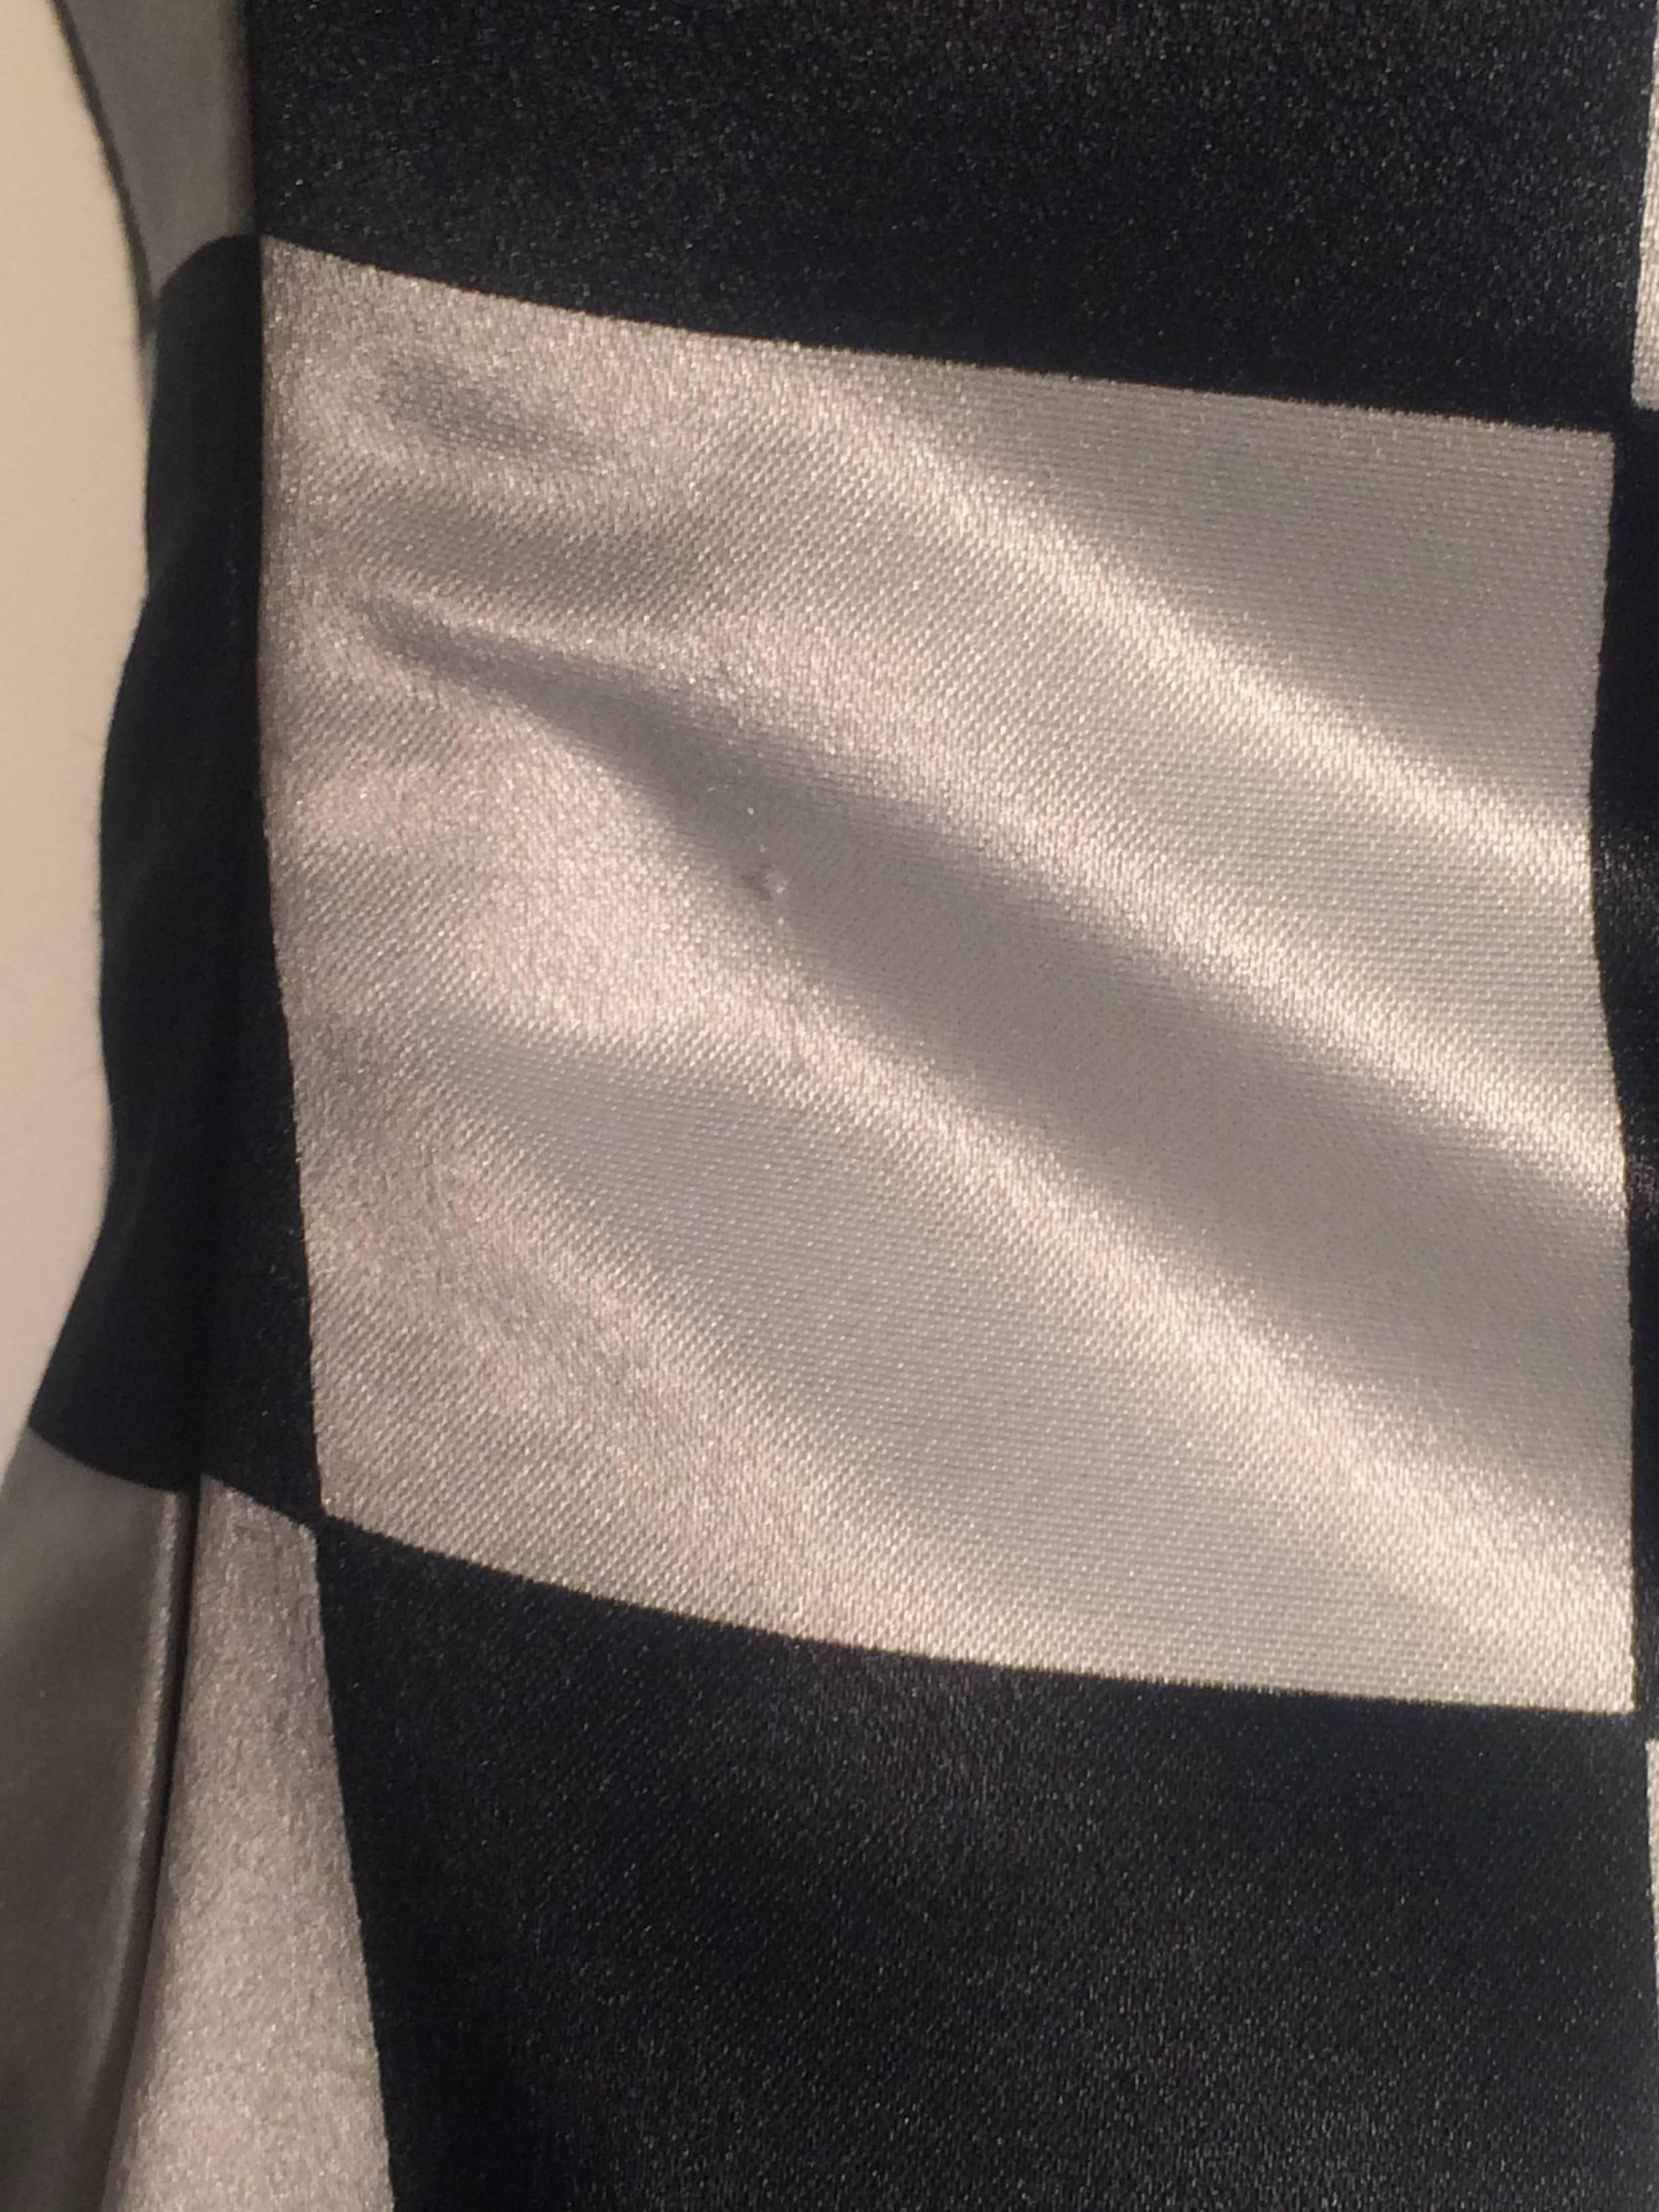 Gianni Versace Couture 1990s Black and White Checked Wiggle Dress 1